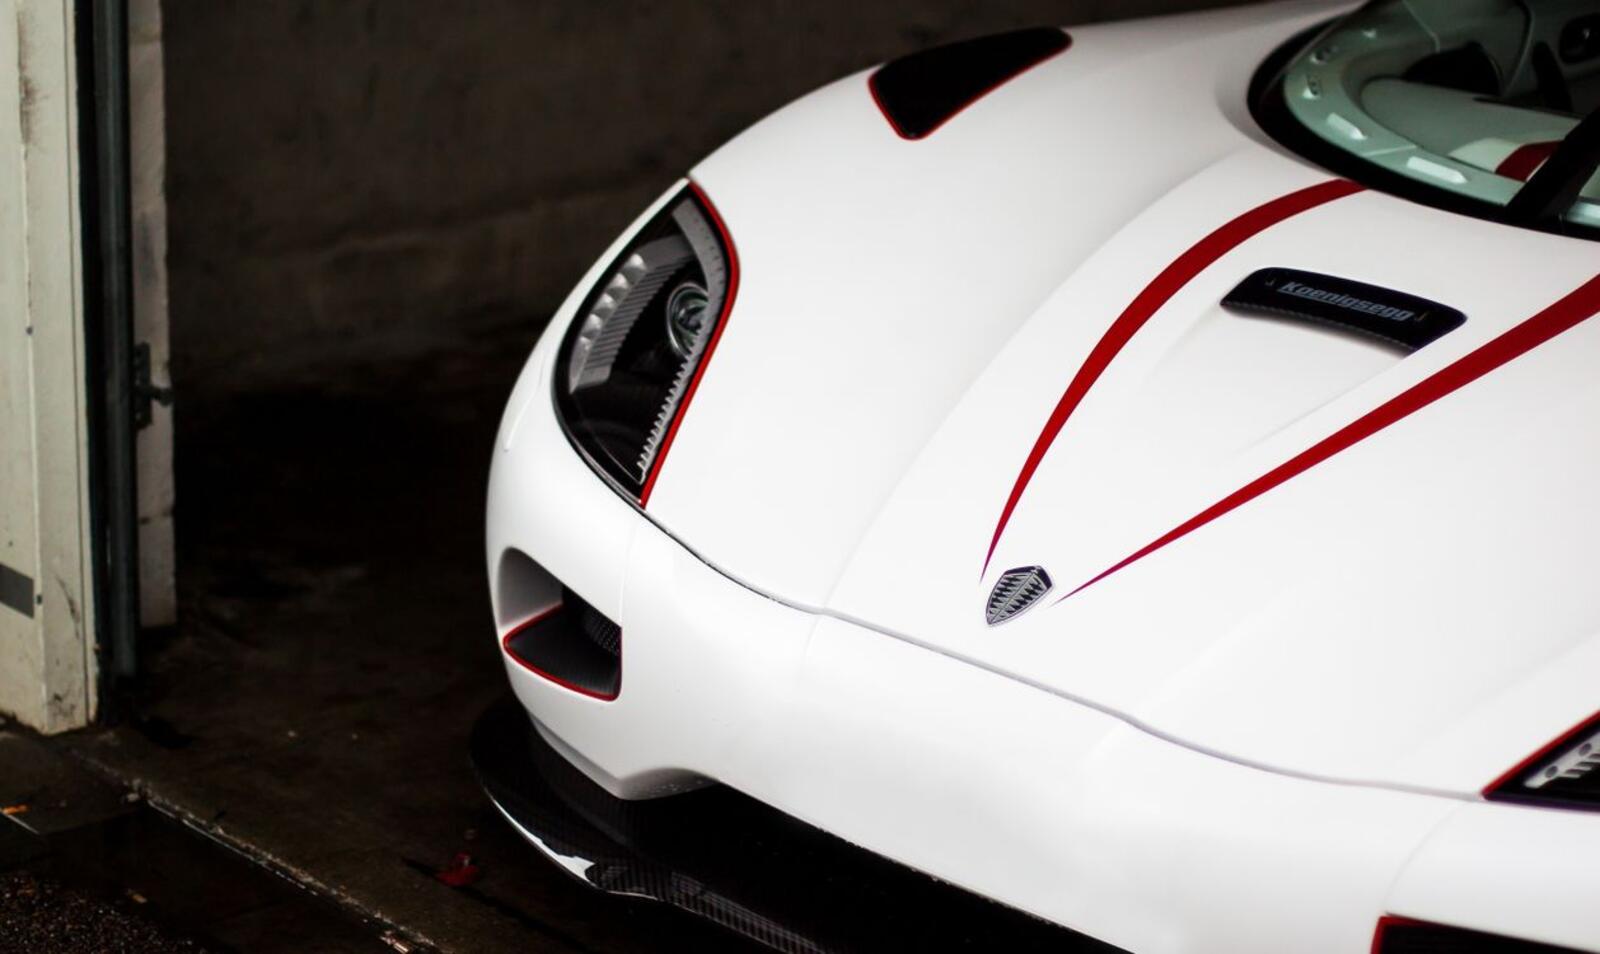 Wallpapers koenigsegg agera r white front view on the desktop